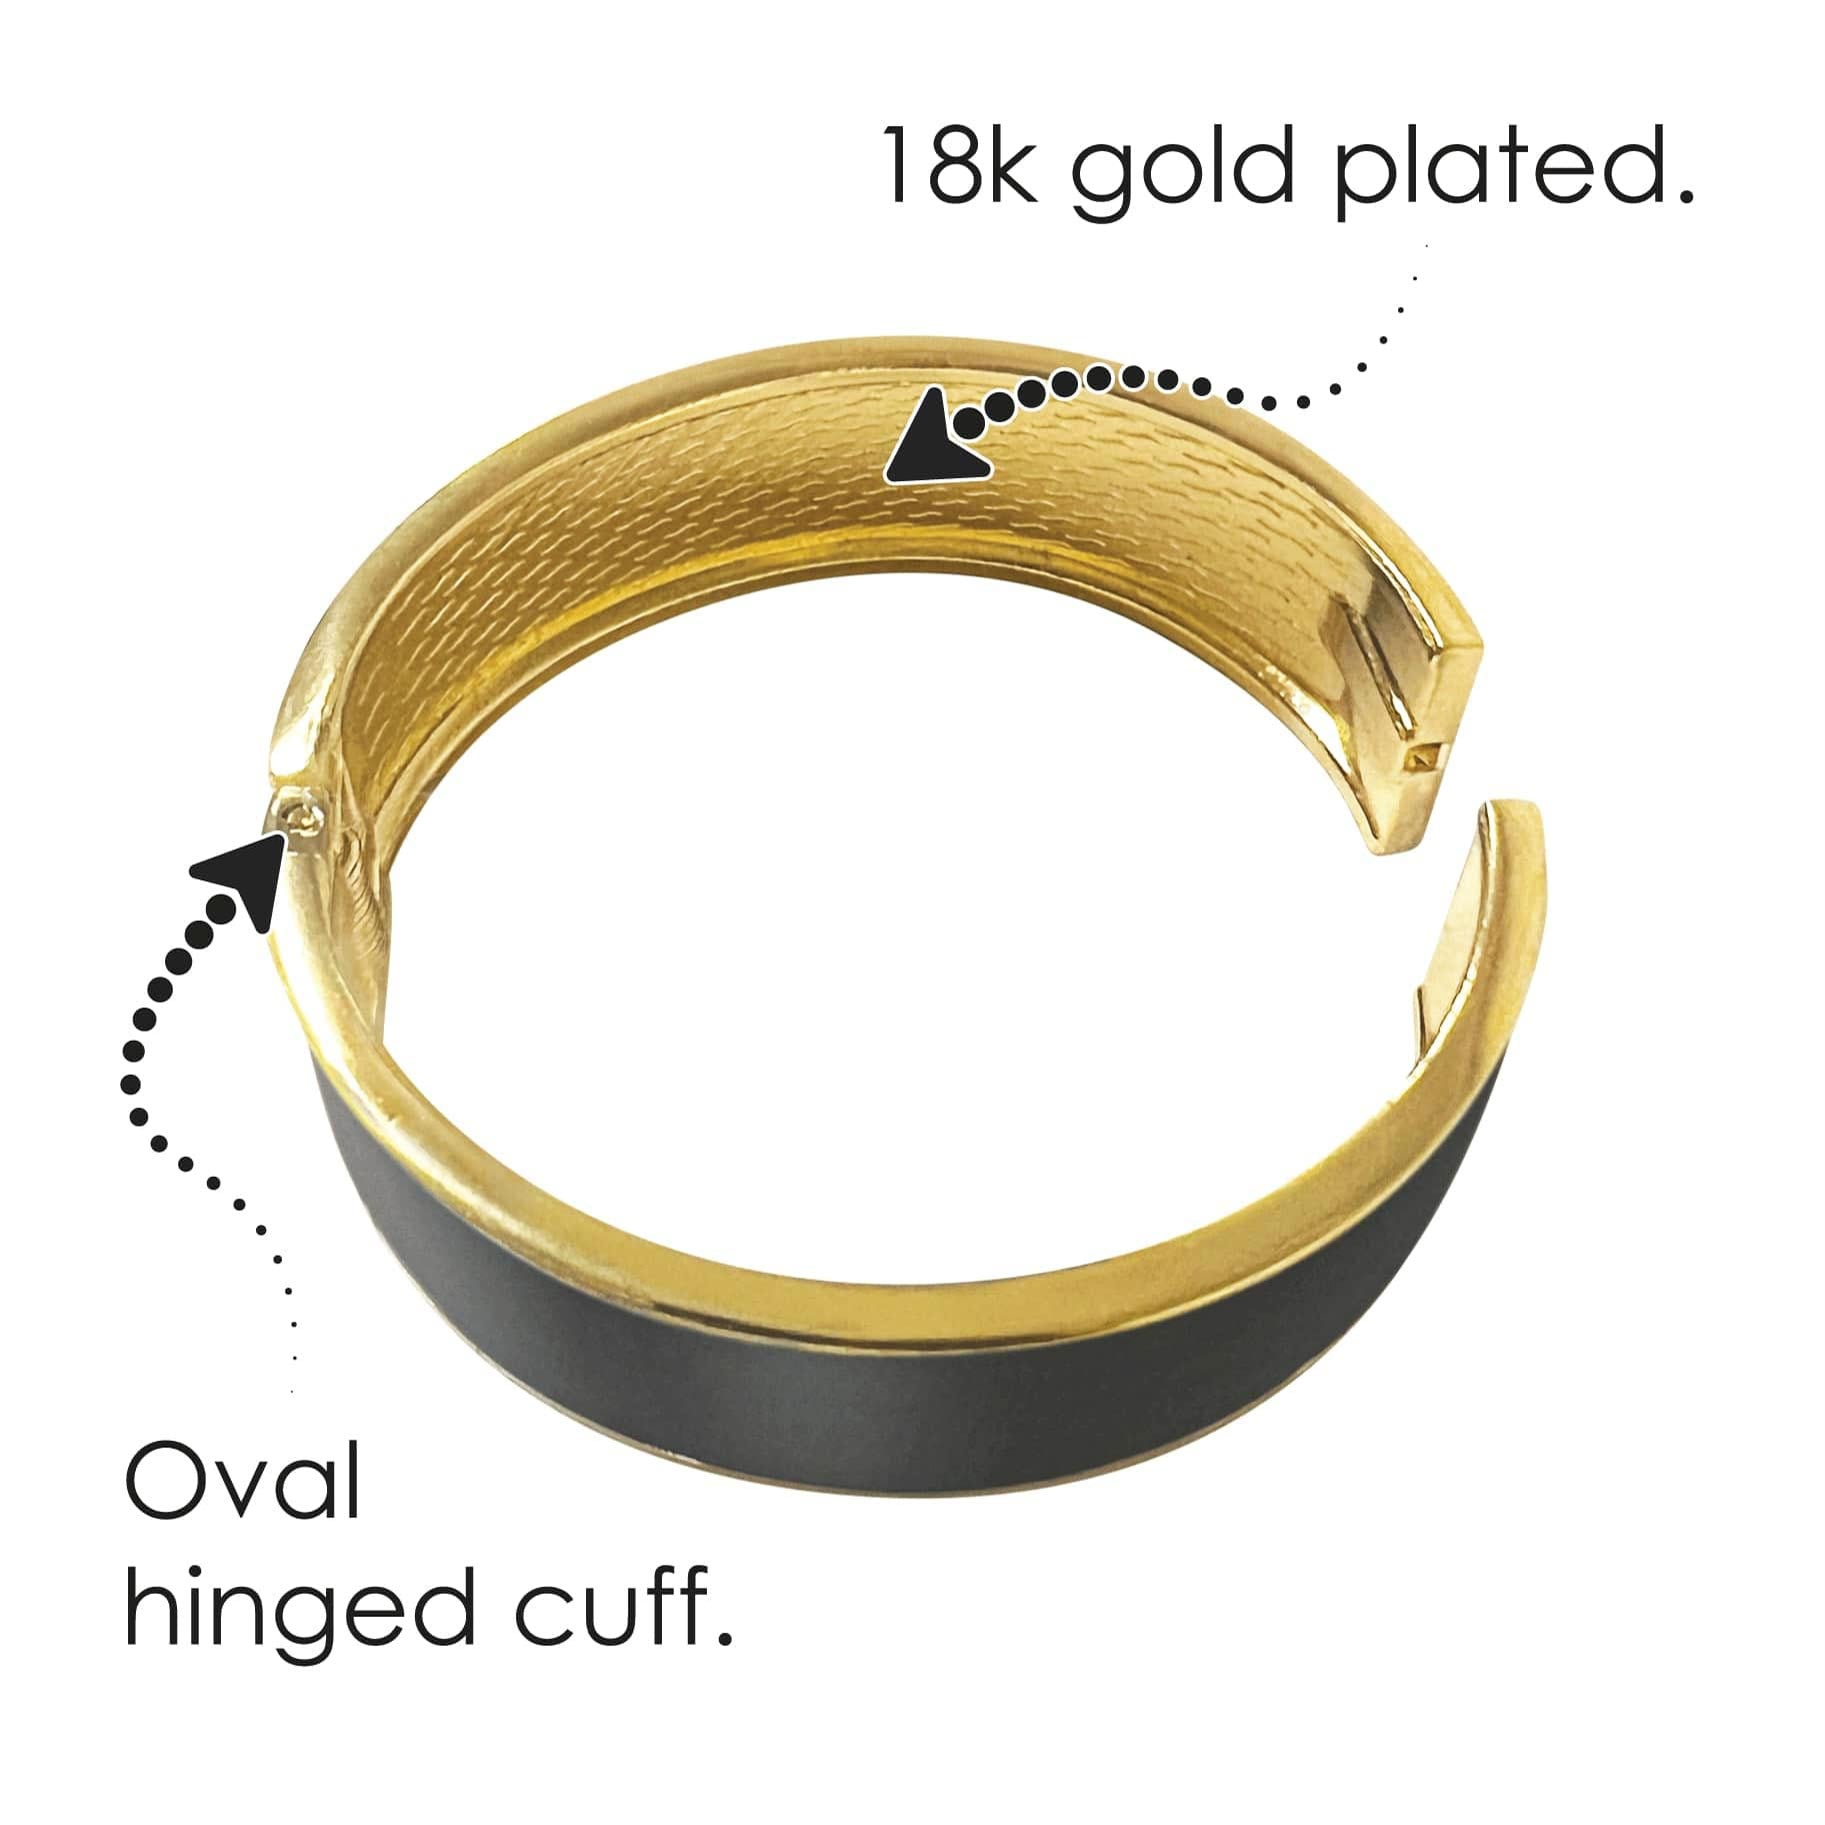 4.2mm 10k Gold Polished and Sparkle Cut Hinged Cuff Stackable Bangle  Bracelet Jewelry Gifts for Women - Walmart.com